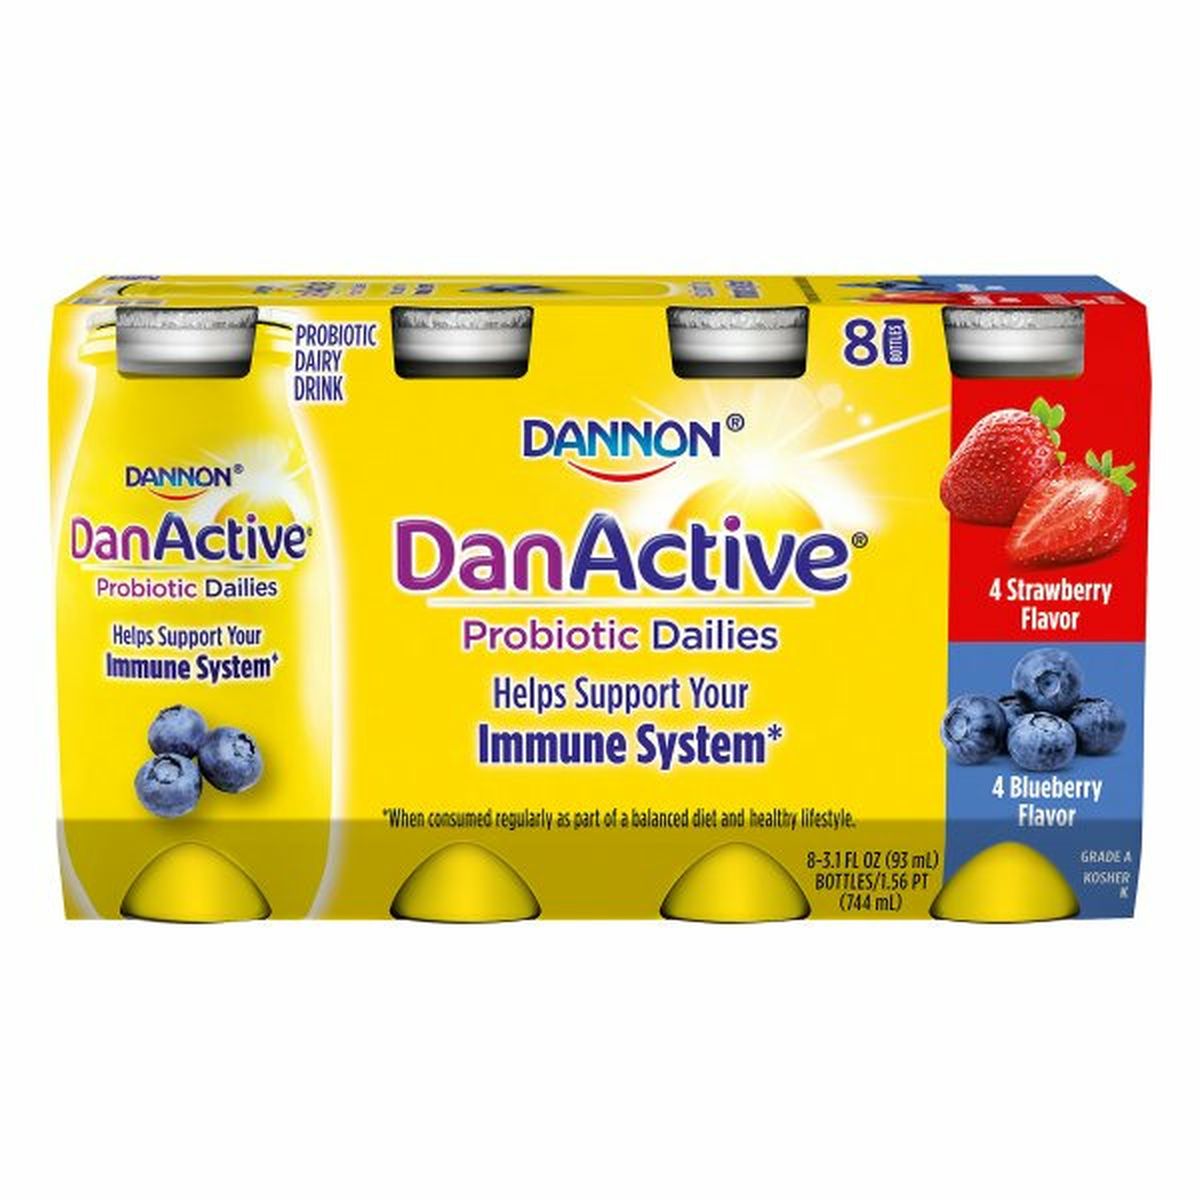 Calories in DanActive Probiotic Dairy Drink, Strawberry, Blueberry, Immune System